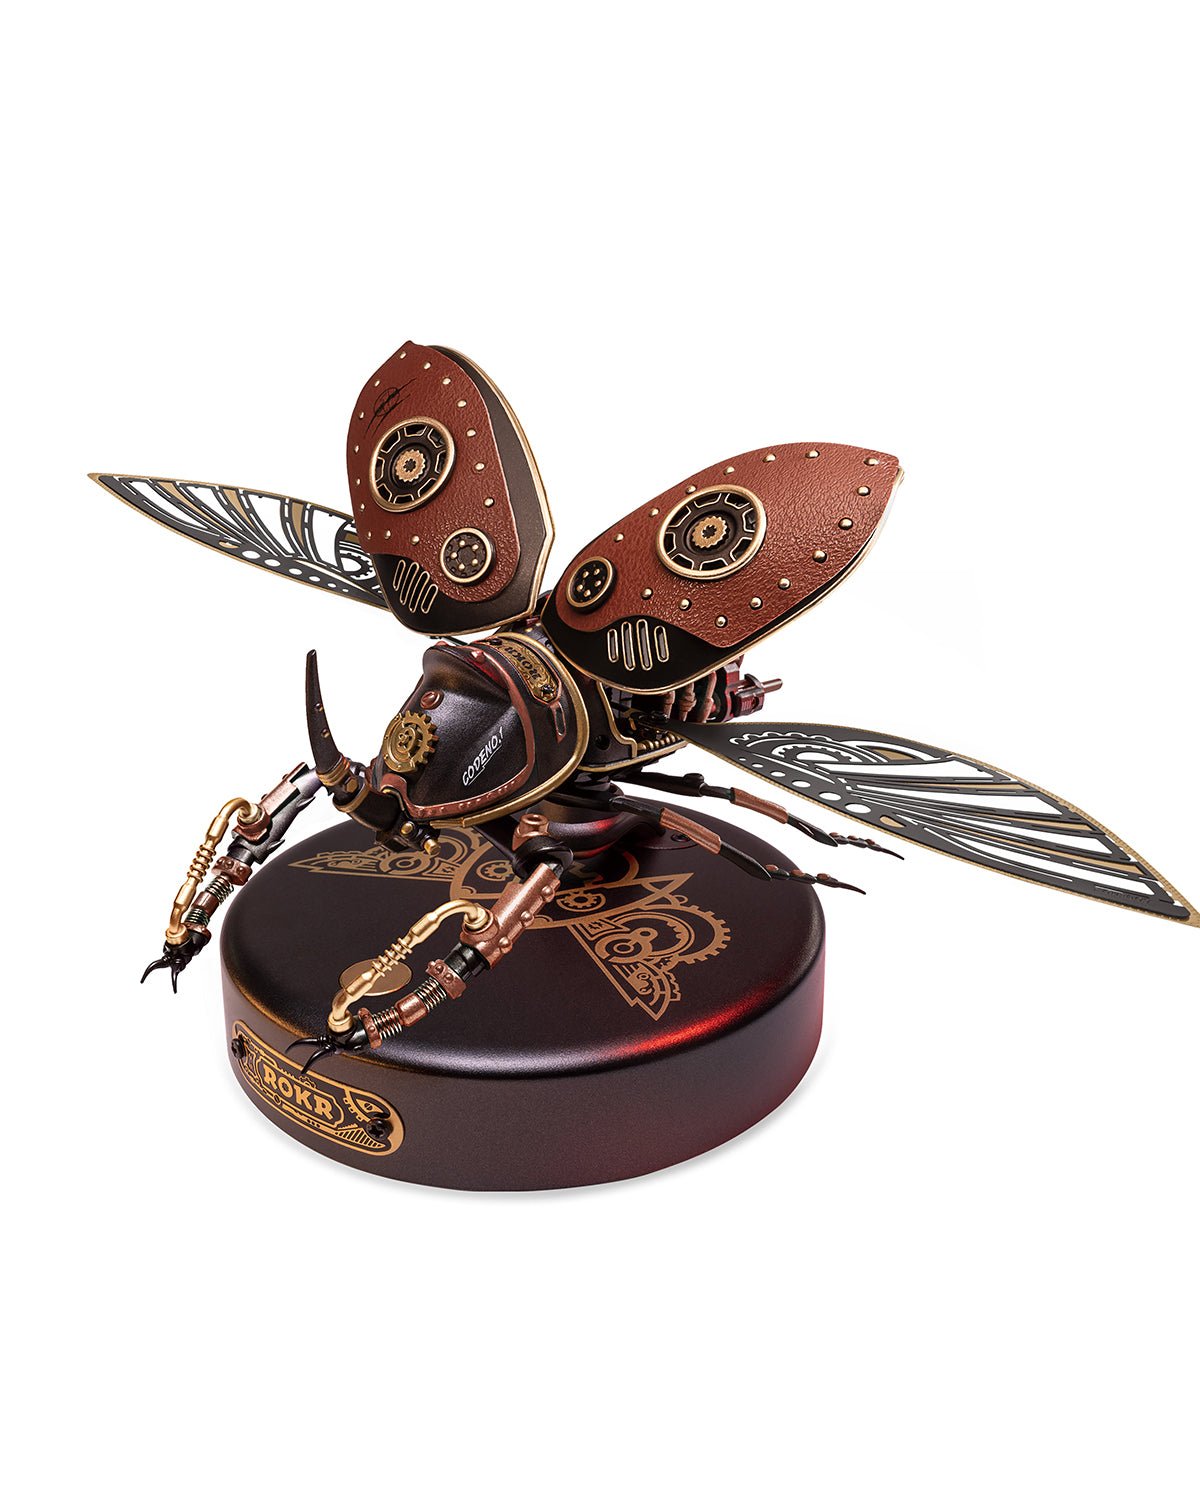 Beetle Model Mechanical Puzzle with Steampunk Ideas